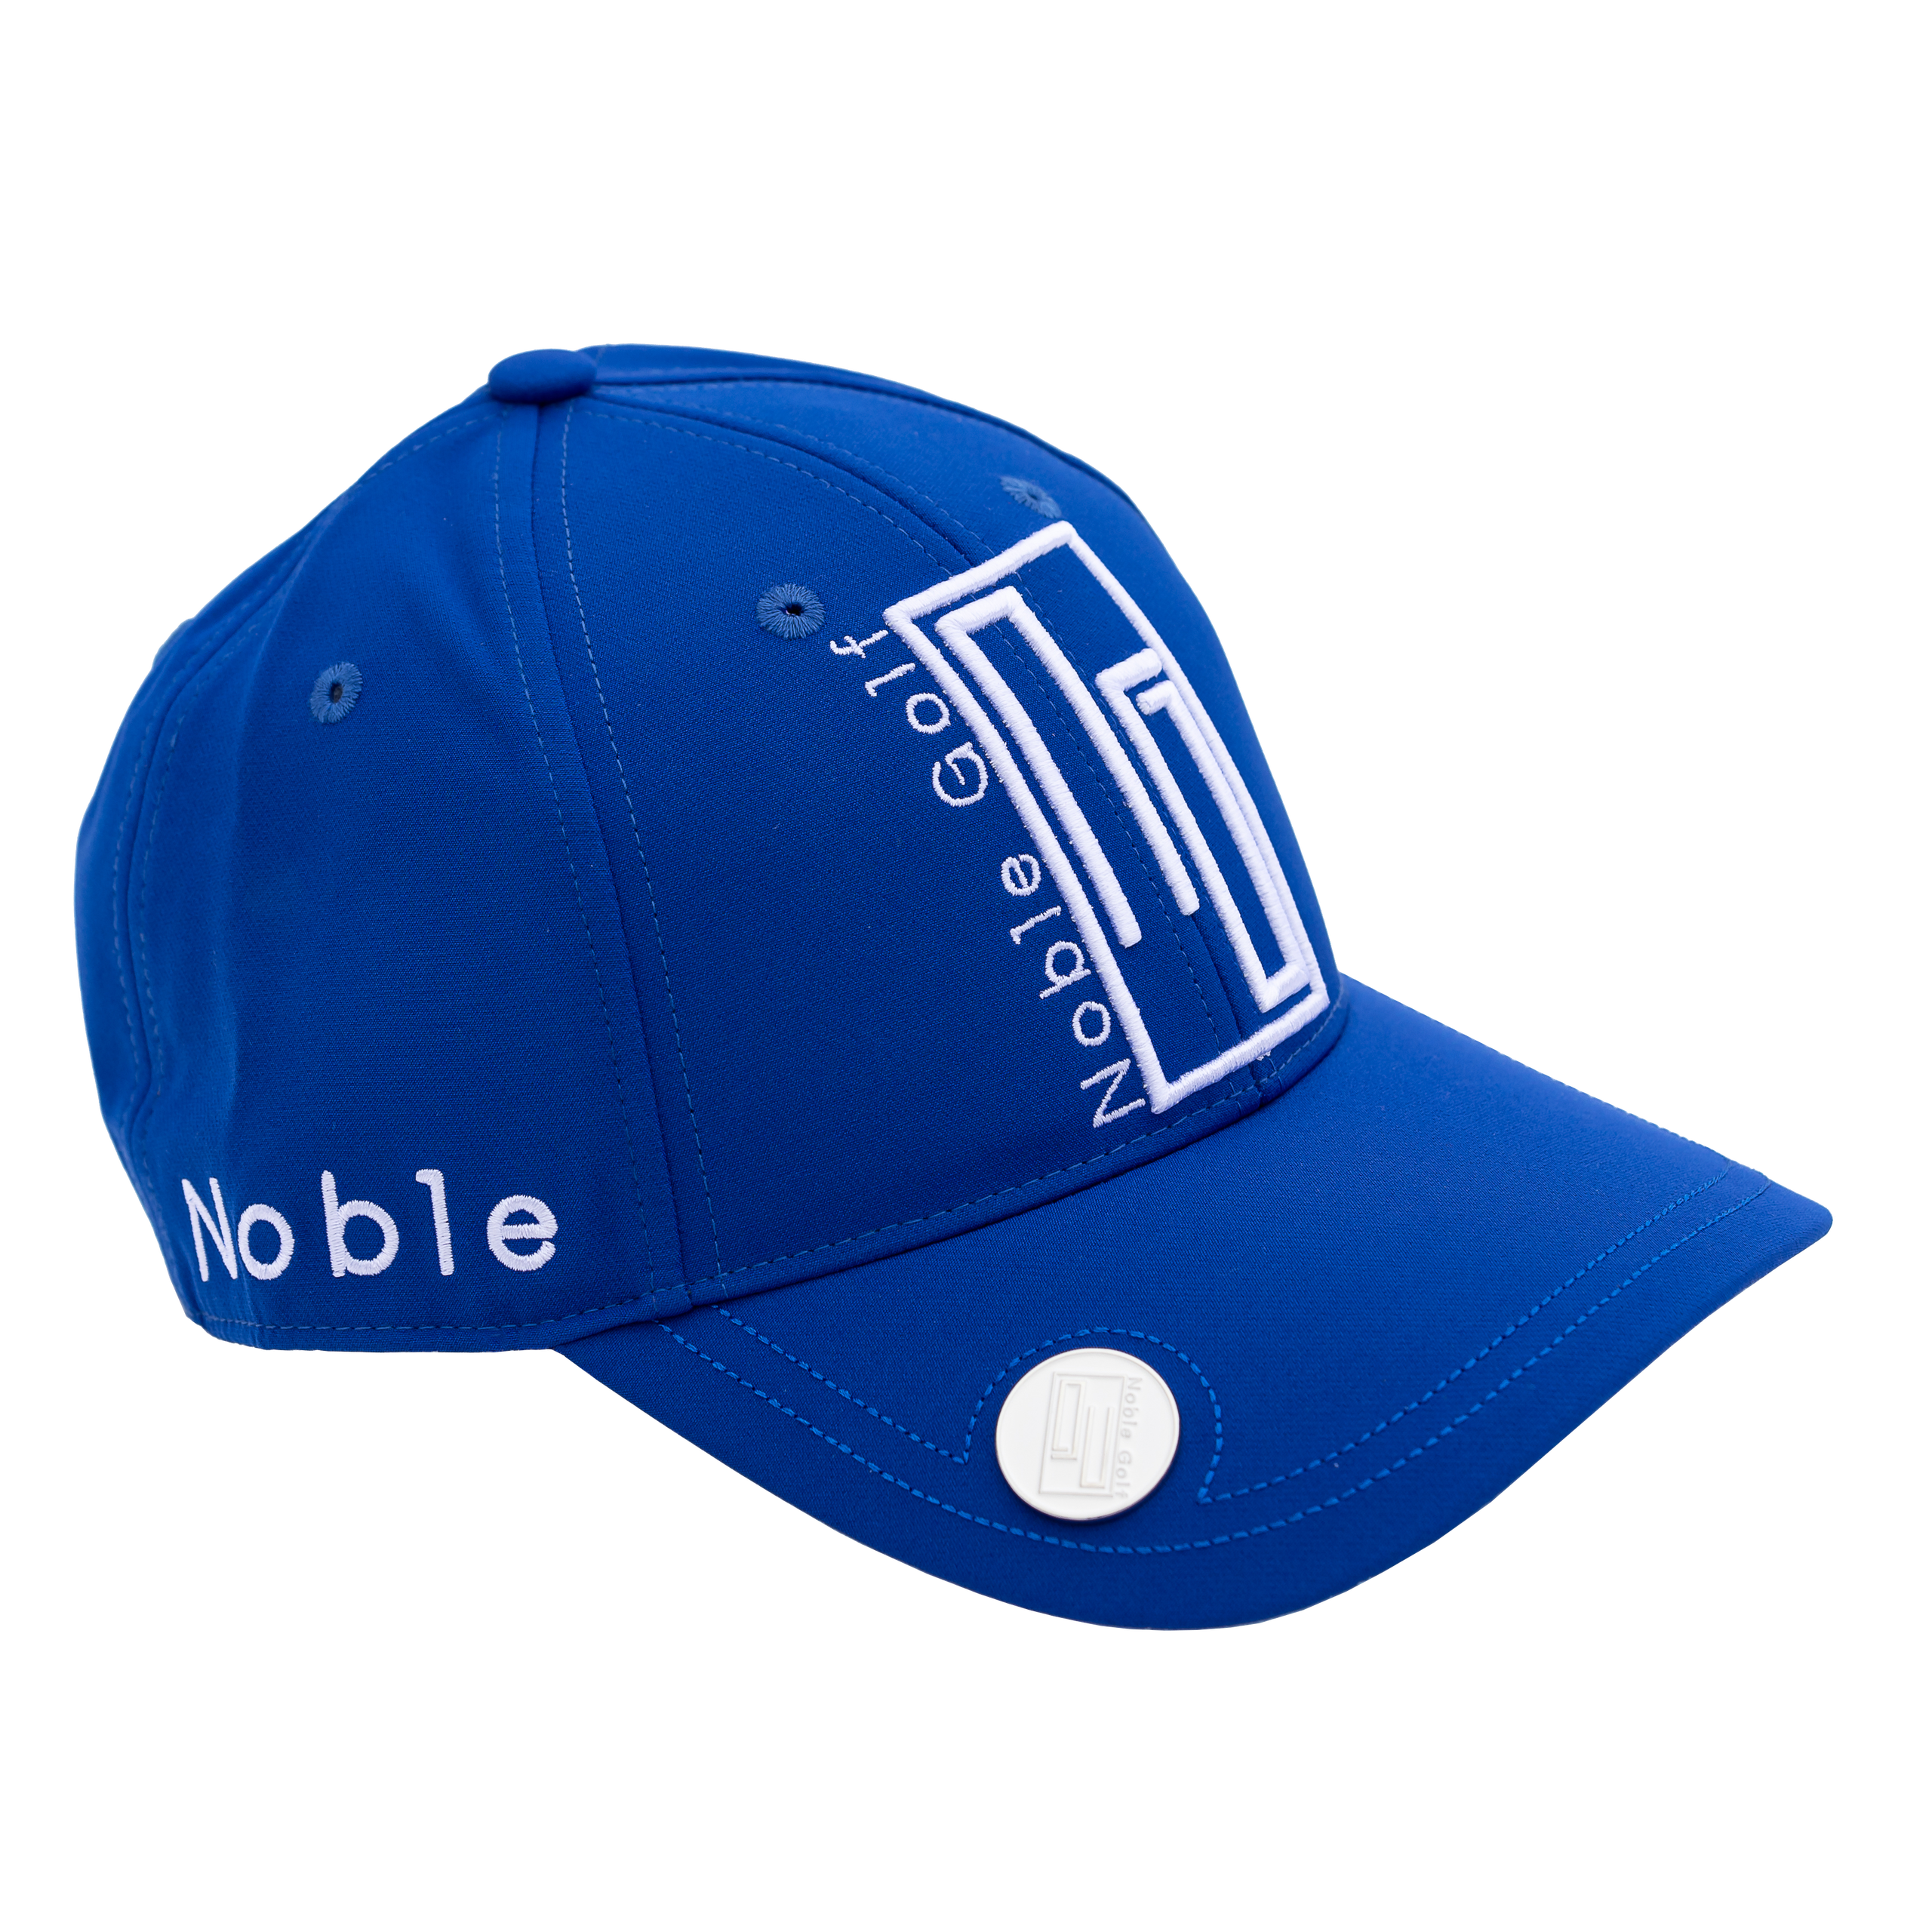 Classy golf cap with ball marker